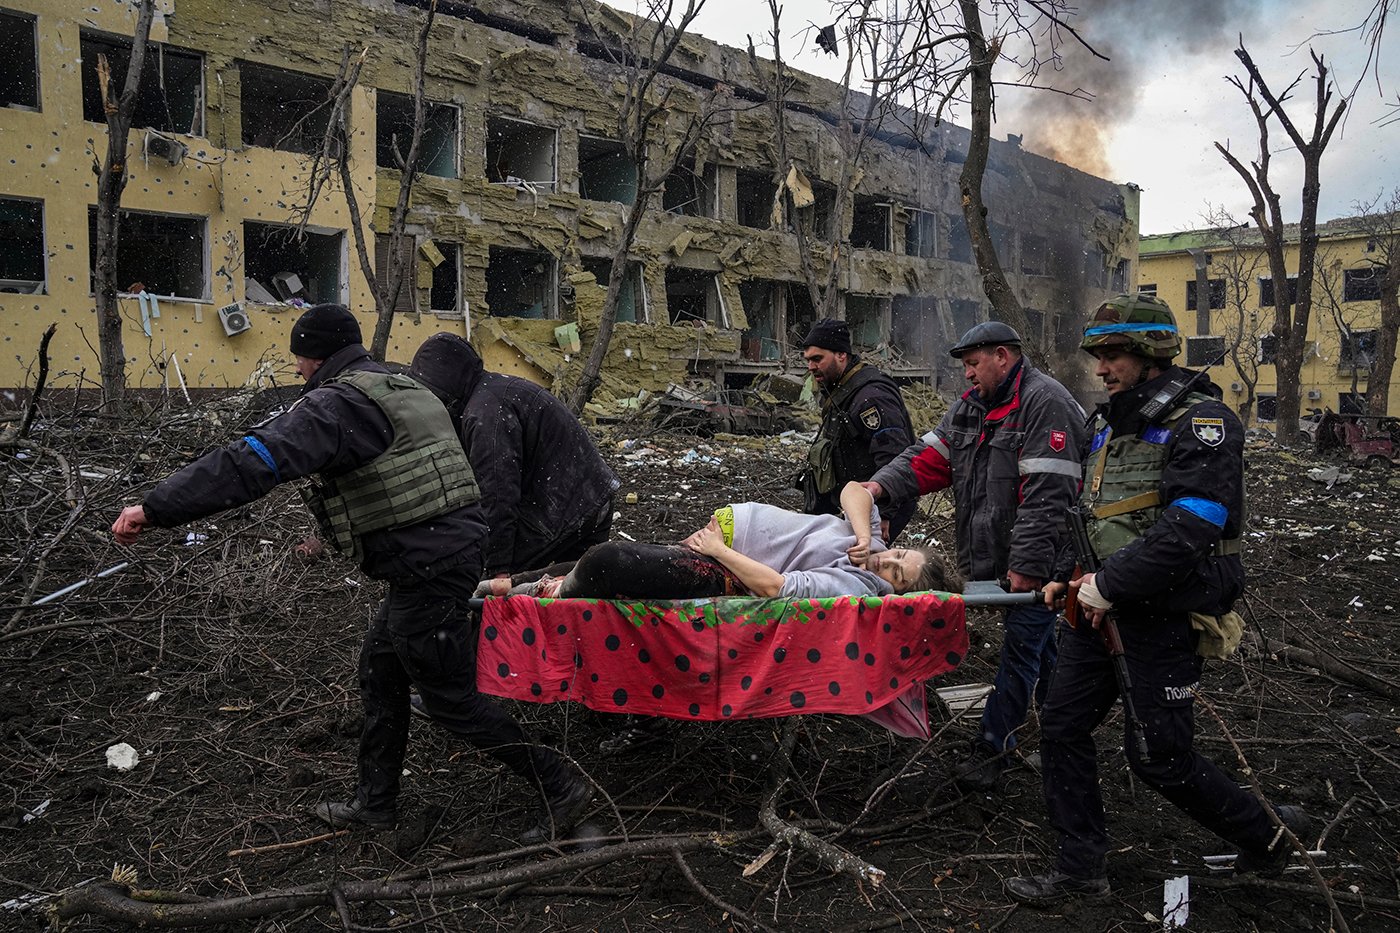 Ukrainian emergency workers and volunteers carry an injured pregnant woman from a maternity hospital damaged by an airstrike in Mariupol, Ukraine, March 9, 2022. The woman was taken to another hospital but did not survive. Still from FRONTLINE PBS and AP’s feature film “20 Days in Mariupol.” Credit: AP Photo/Evgeniy Maloletka